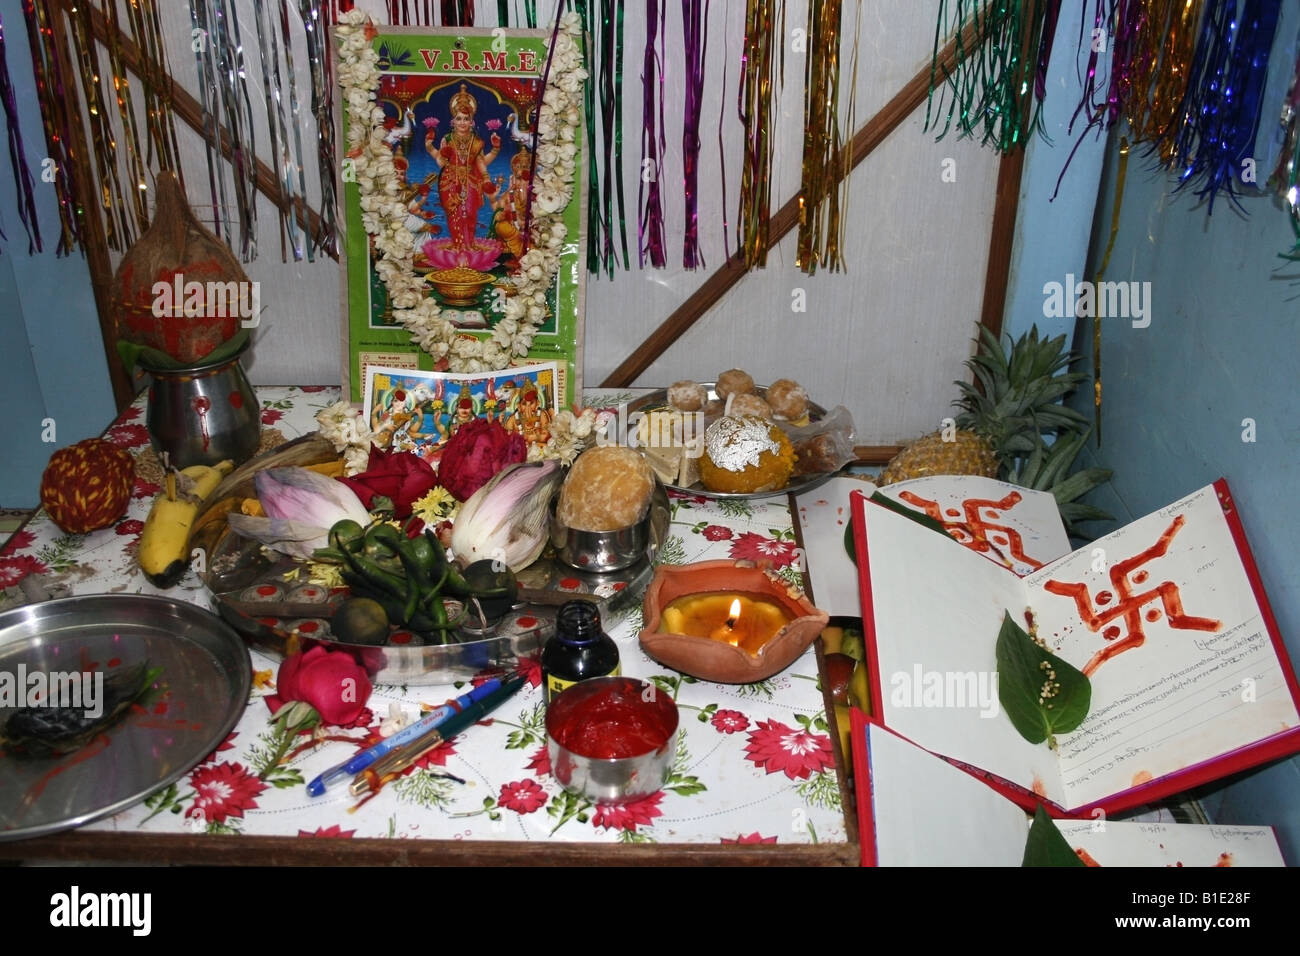 Shrine with offerings to the Hindu goddess Lakshmi for laxmi pooja during Diwali in the shop of a businessman , India Stock Photo